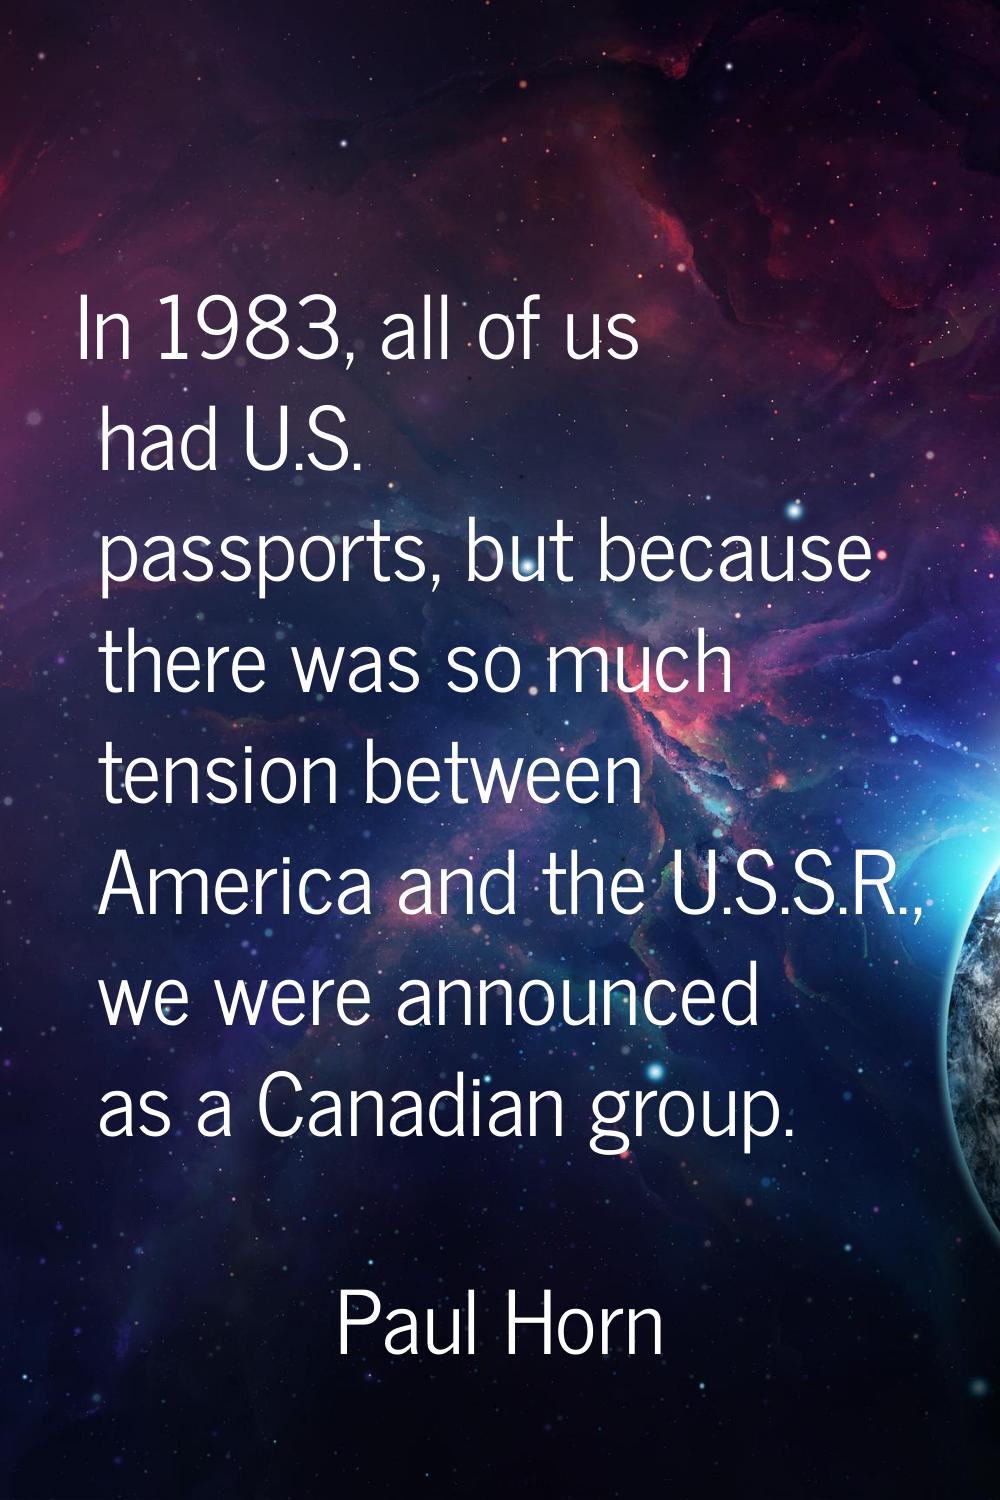 In 1983, all of us had U.S. passports, but because there was so much tension between America and th